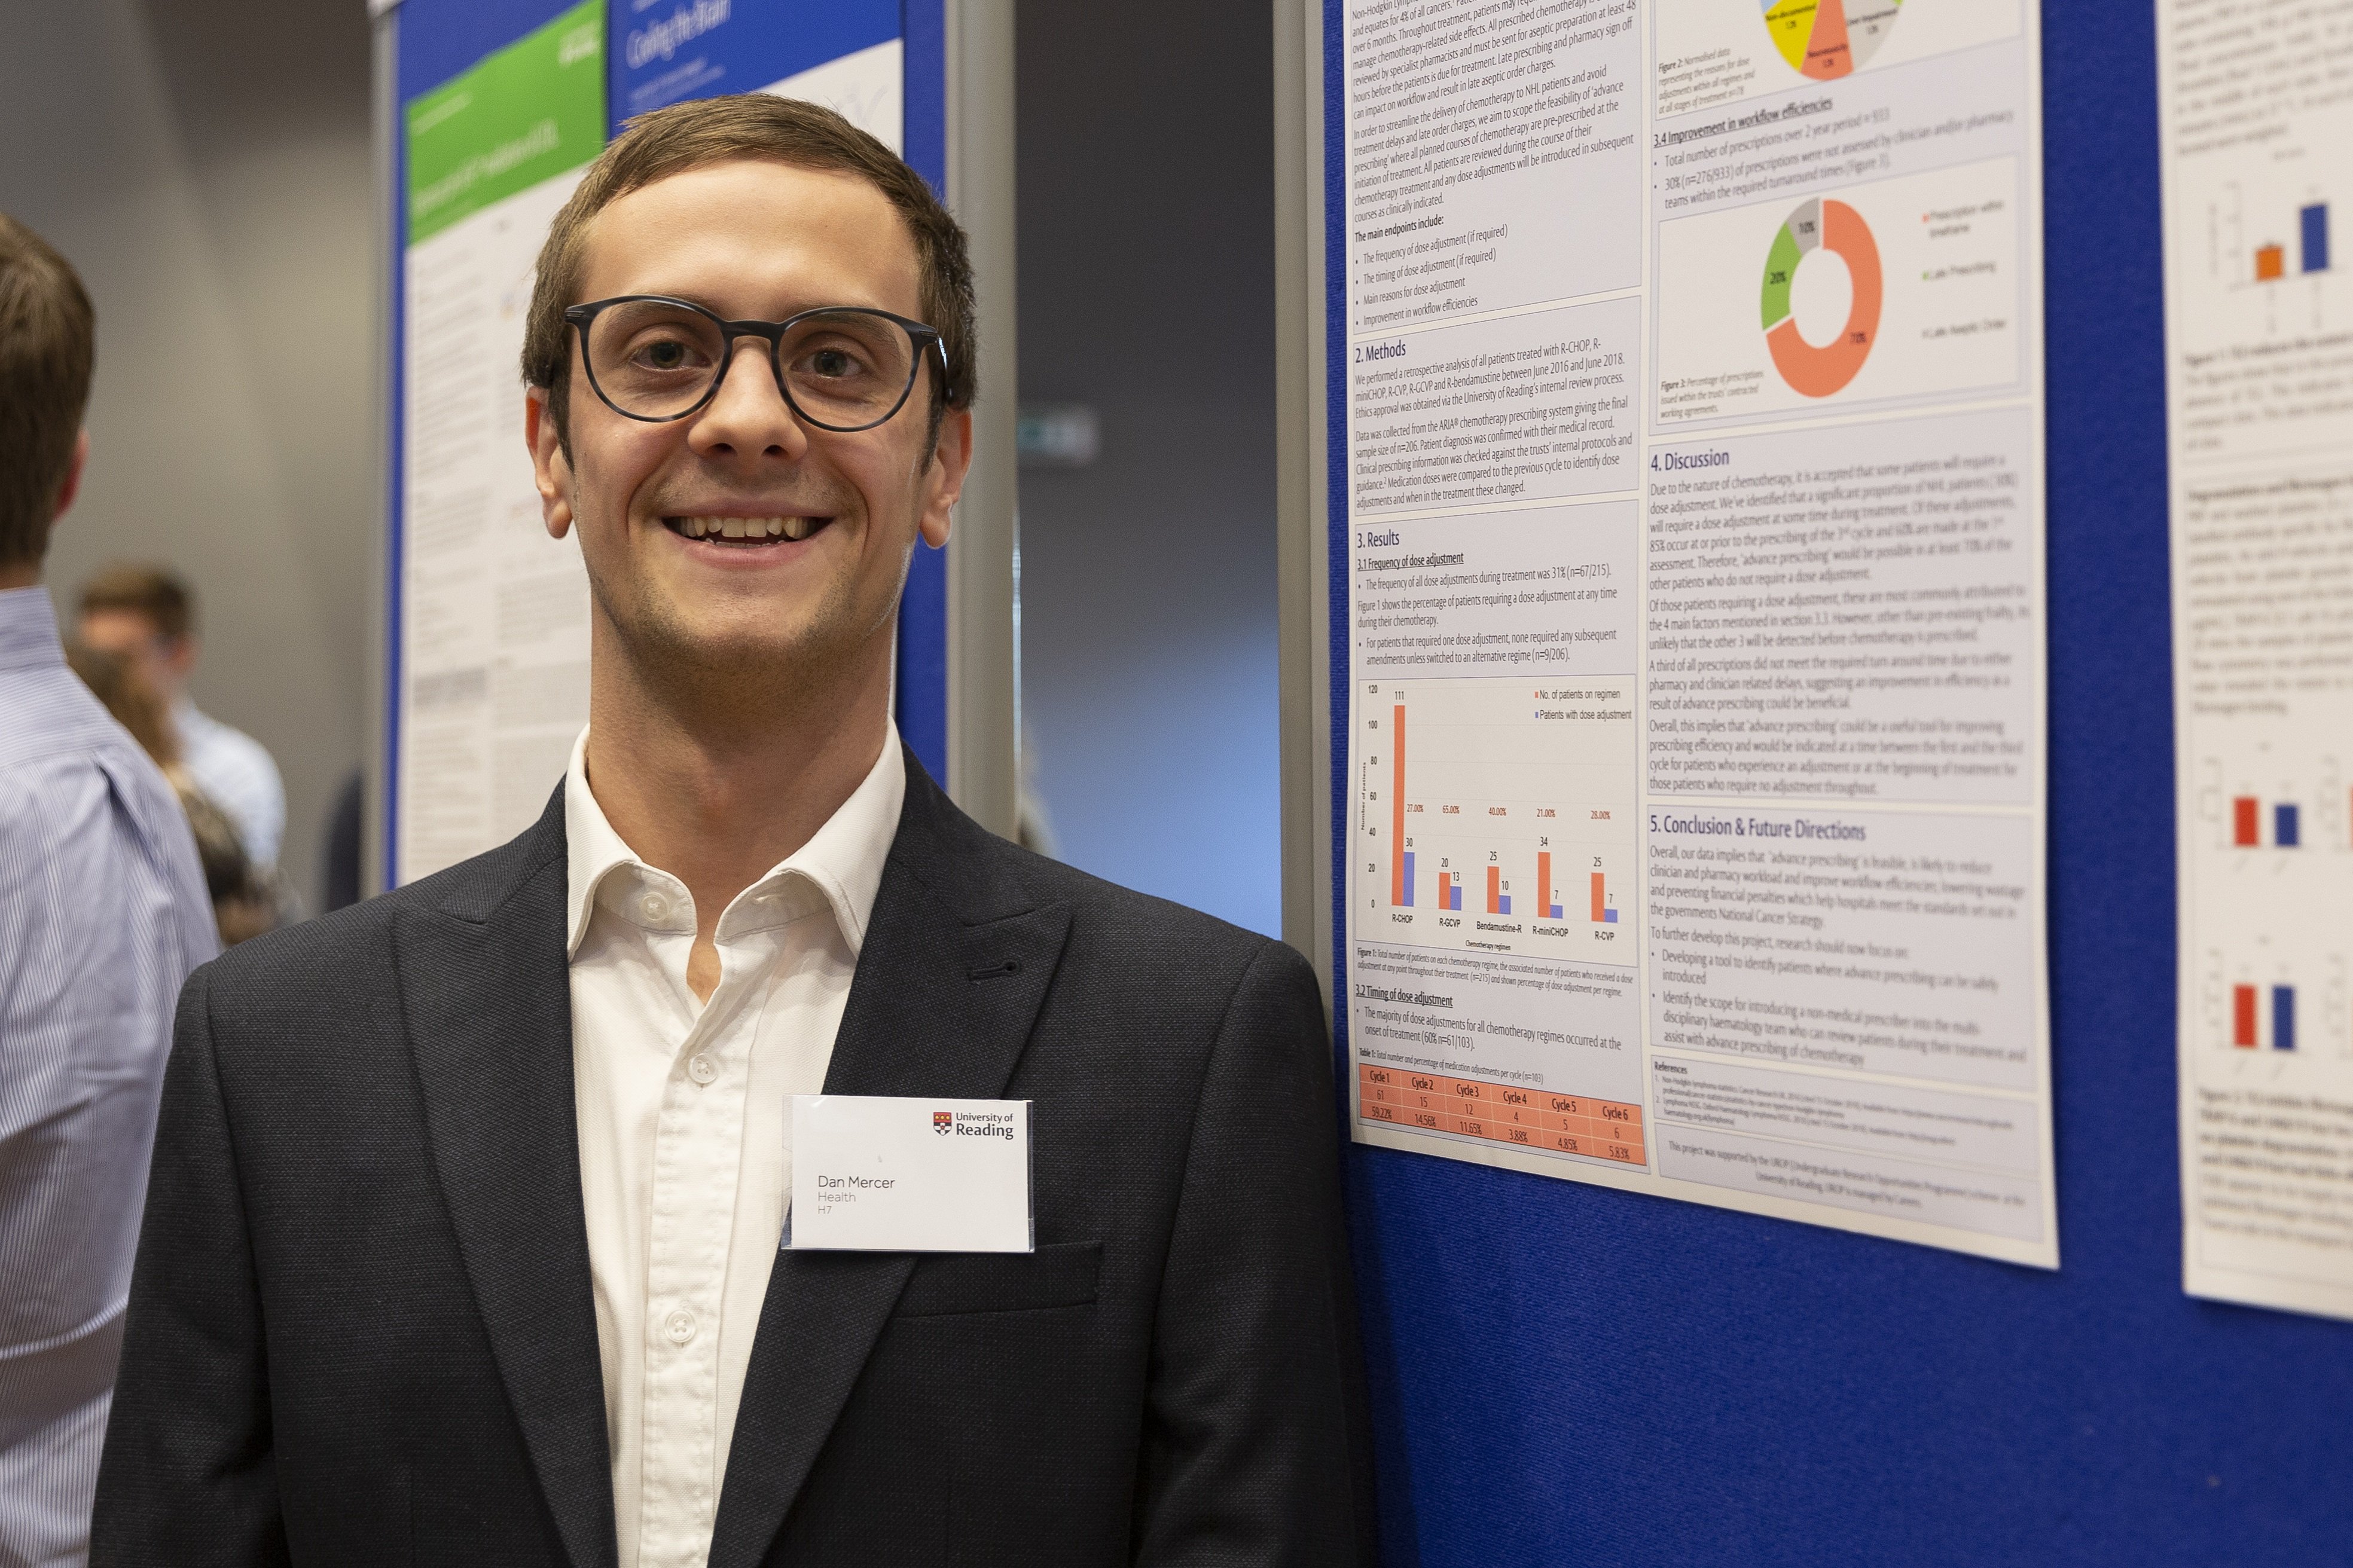 Top tips on writing an academic poster